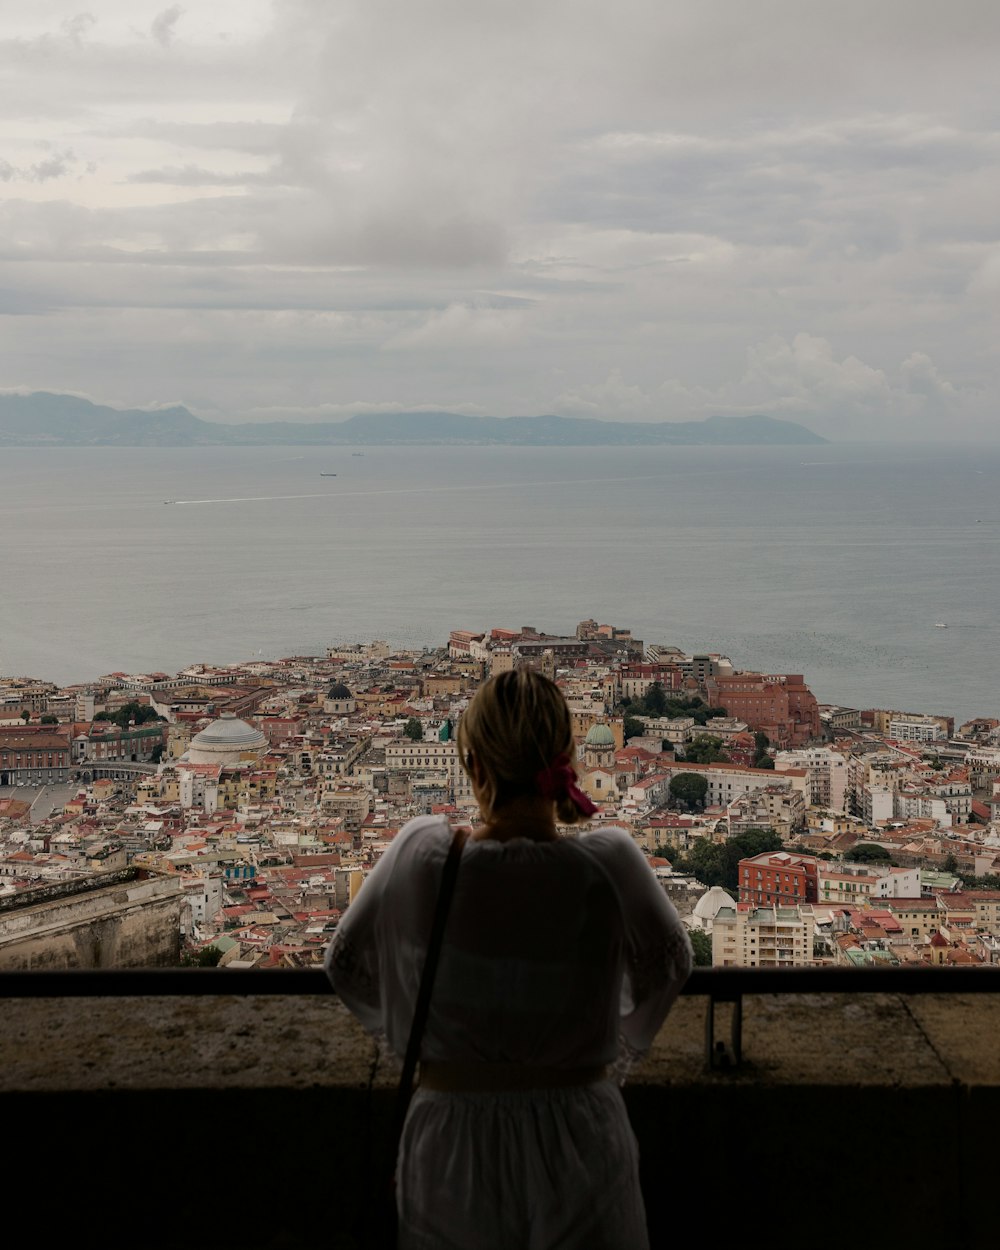 a woman looking out over a city from a tower